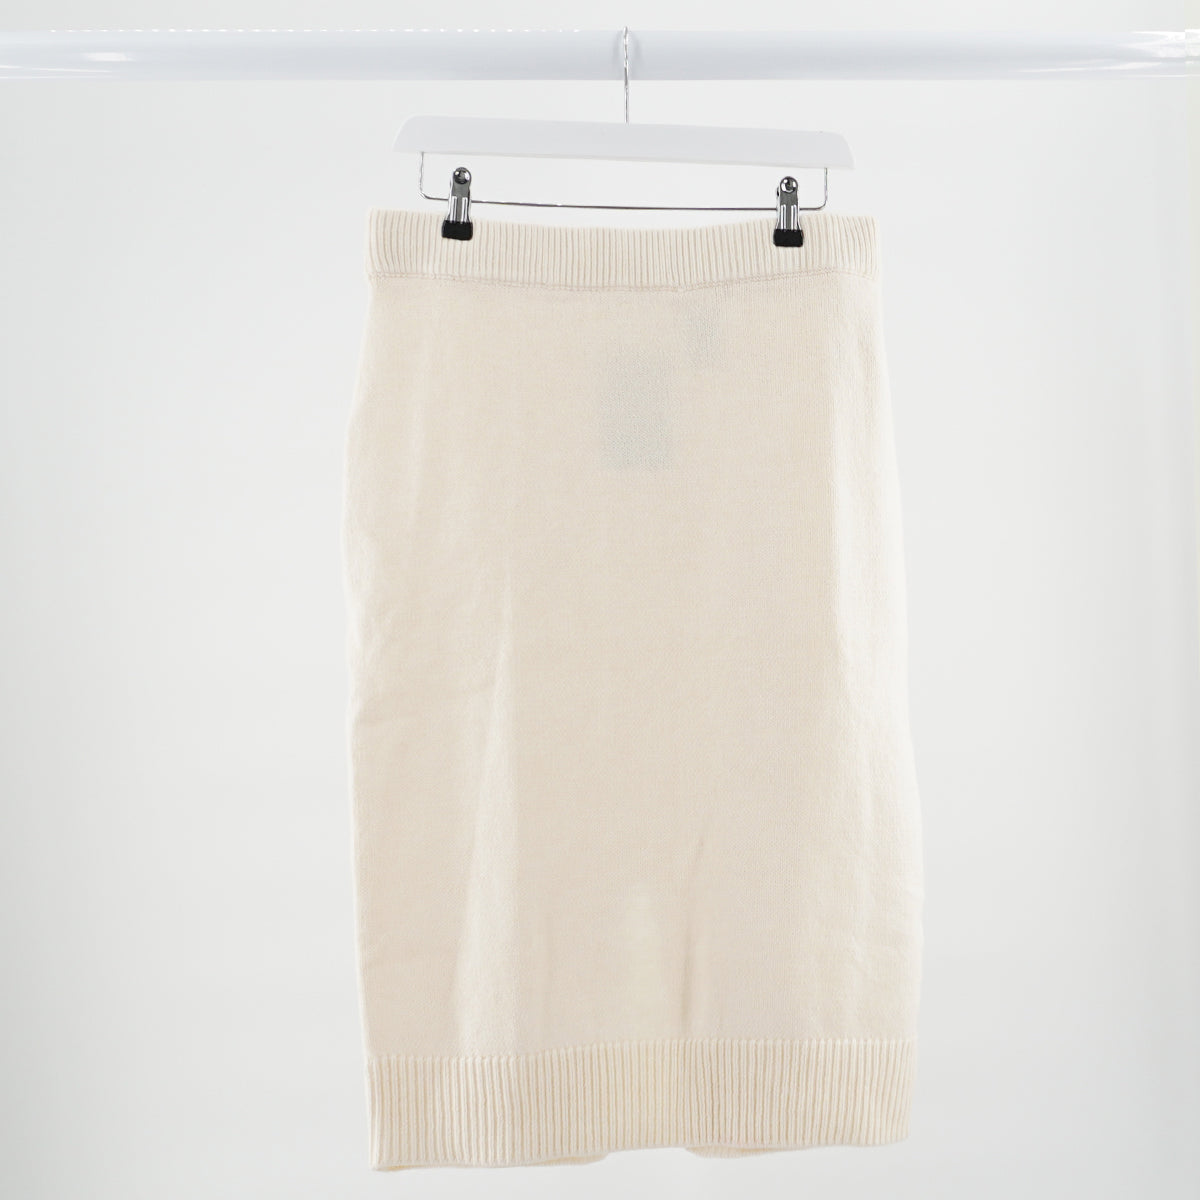 H&M Beige Knitted Skirt- Size M